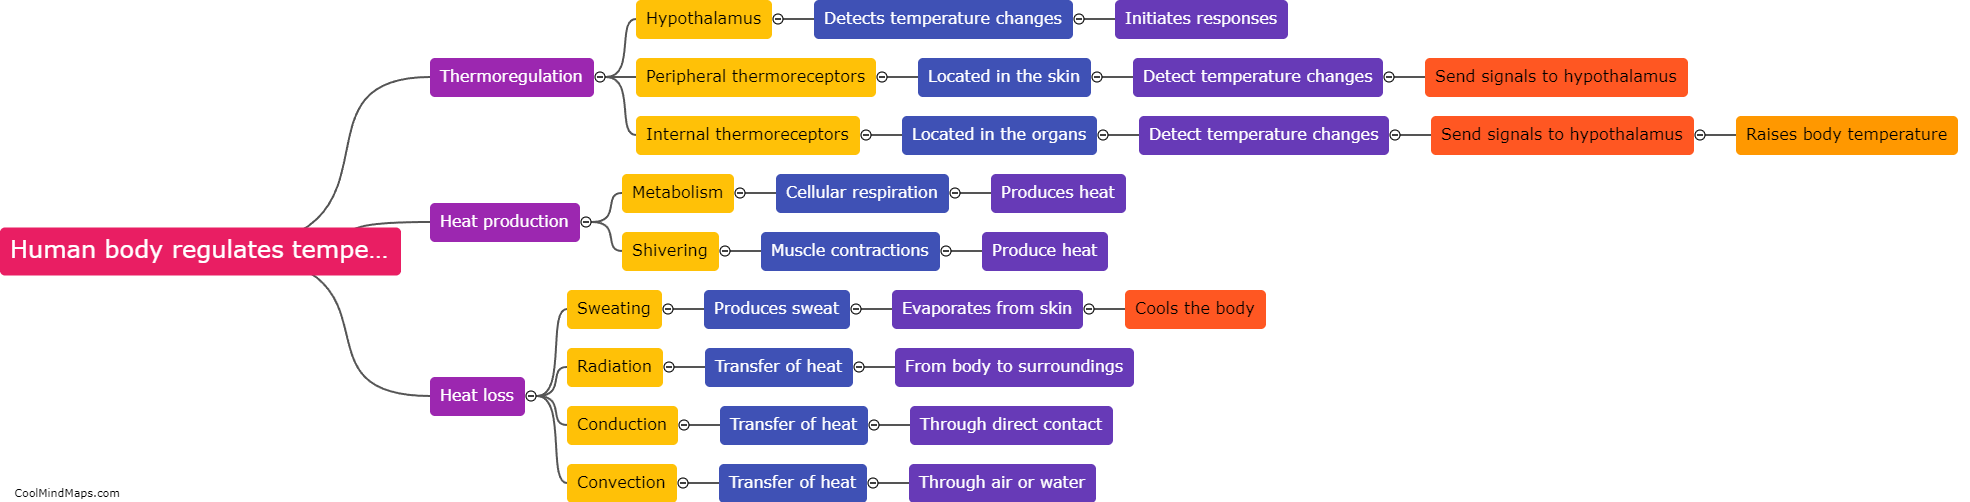 How does the human body regulate temperature?